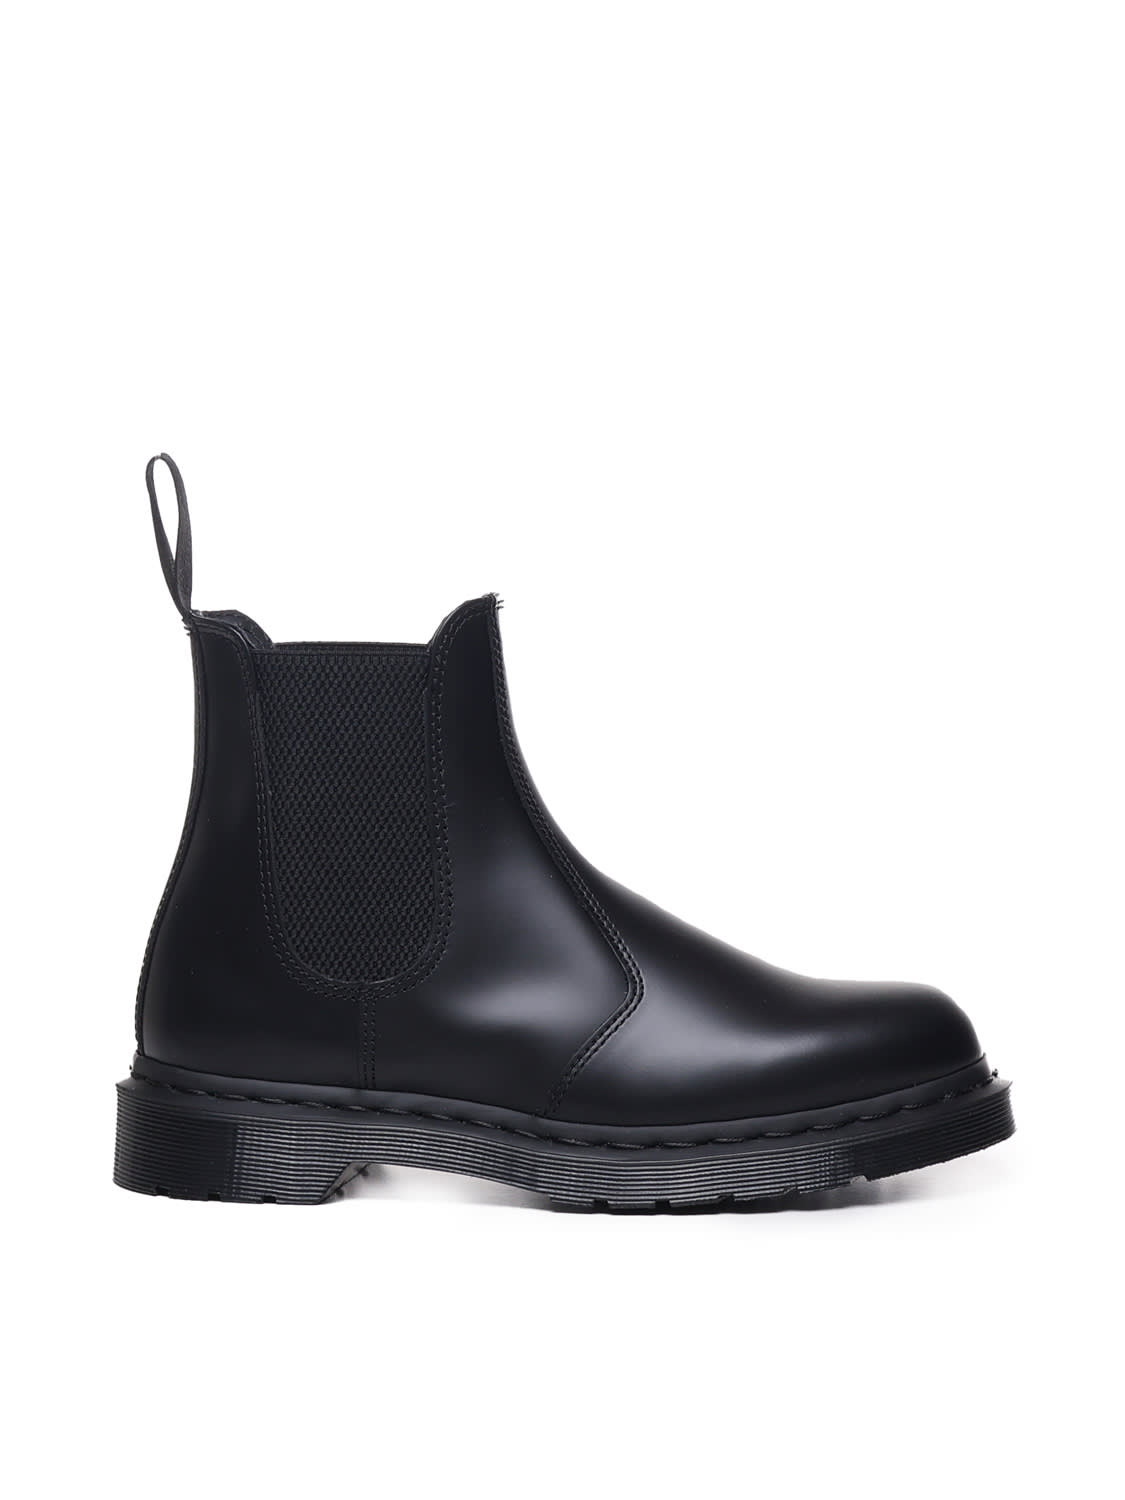 DR. MARTENS' 2976 MONO CHELSEA BOOTS IN SMOOTH LEATHER